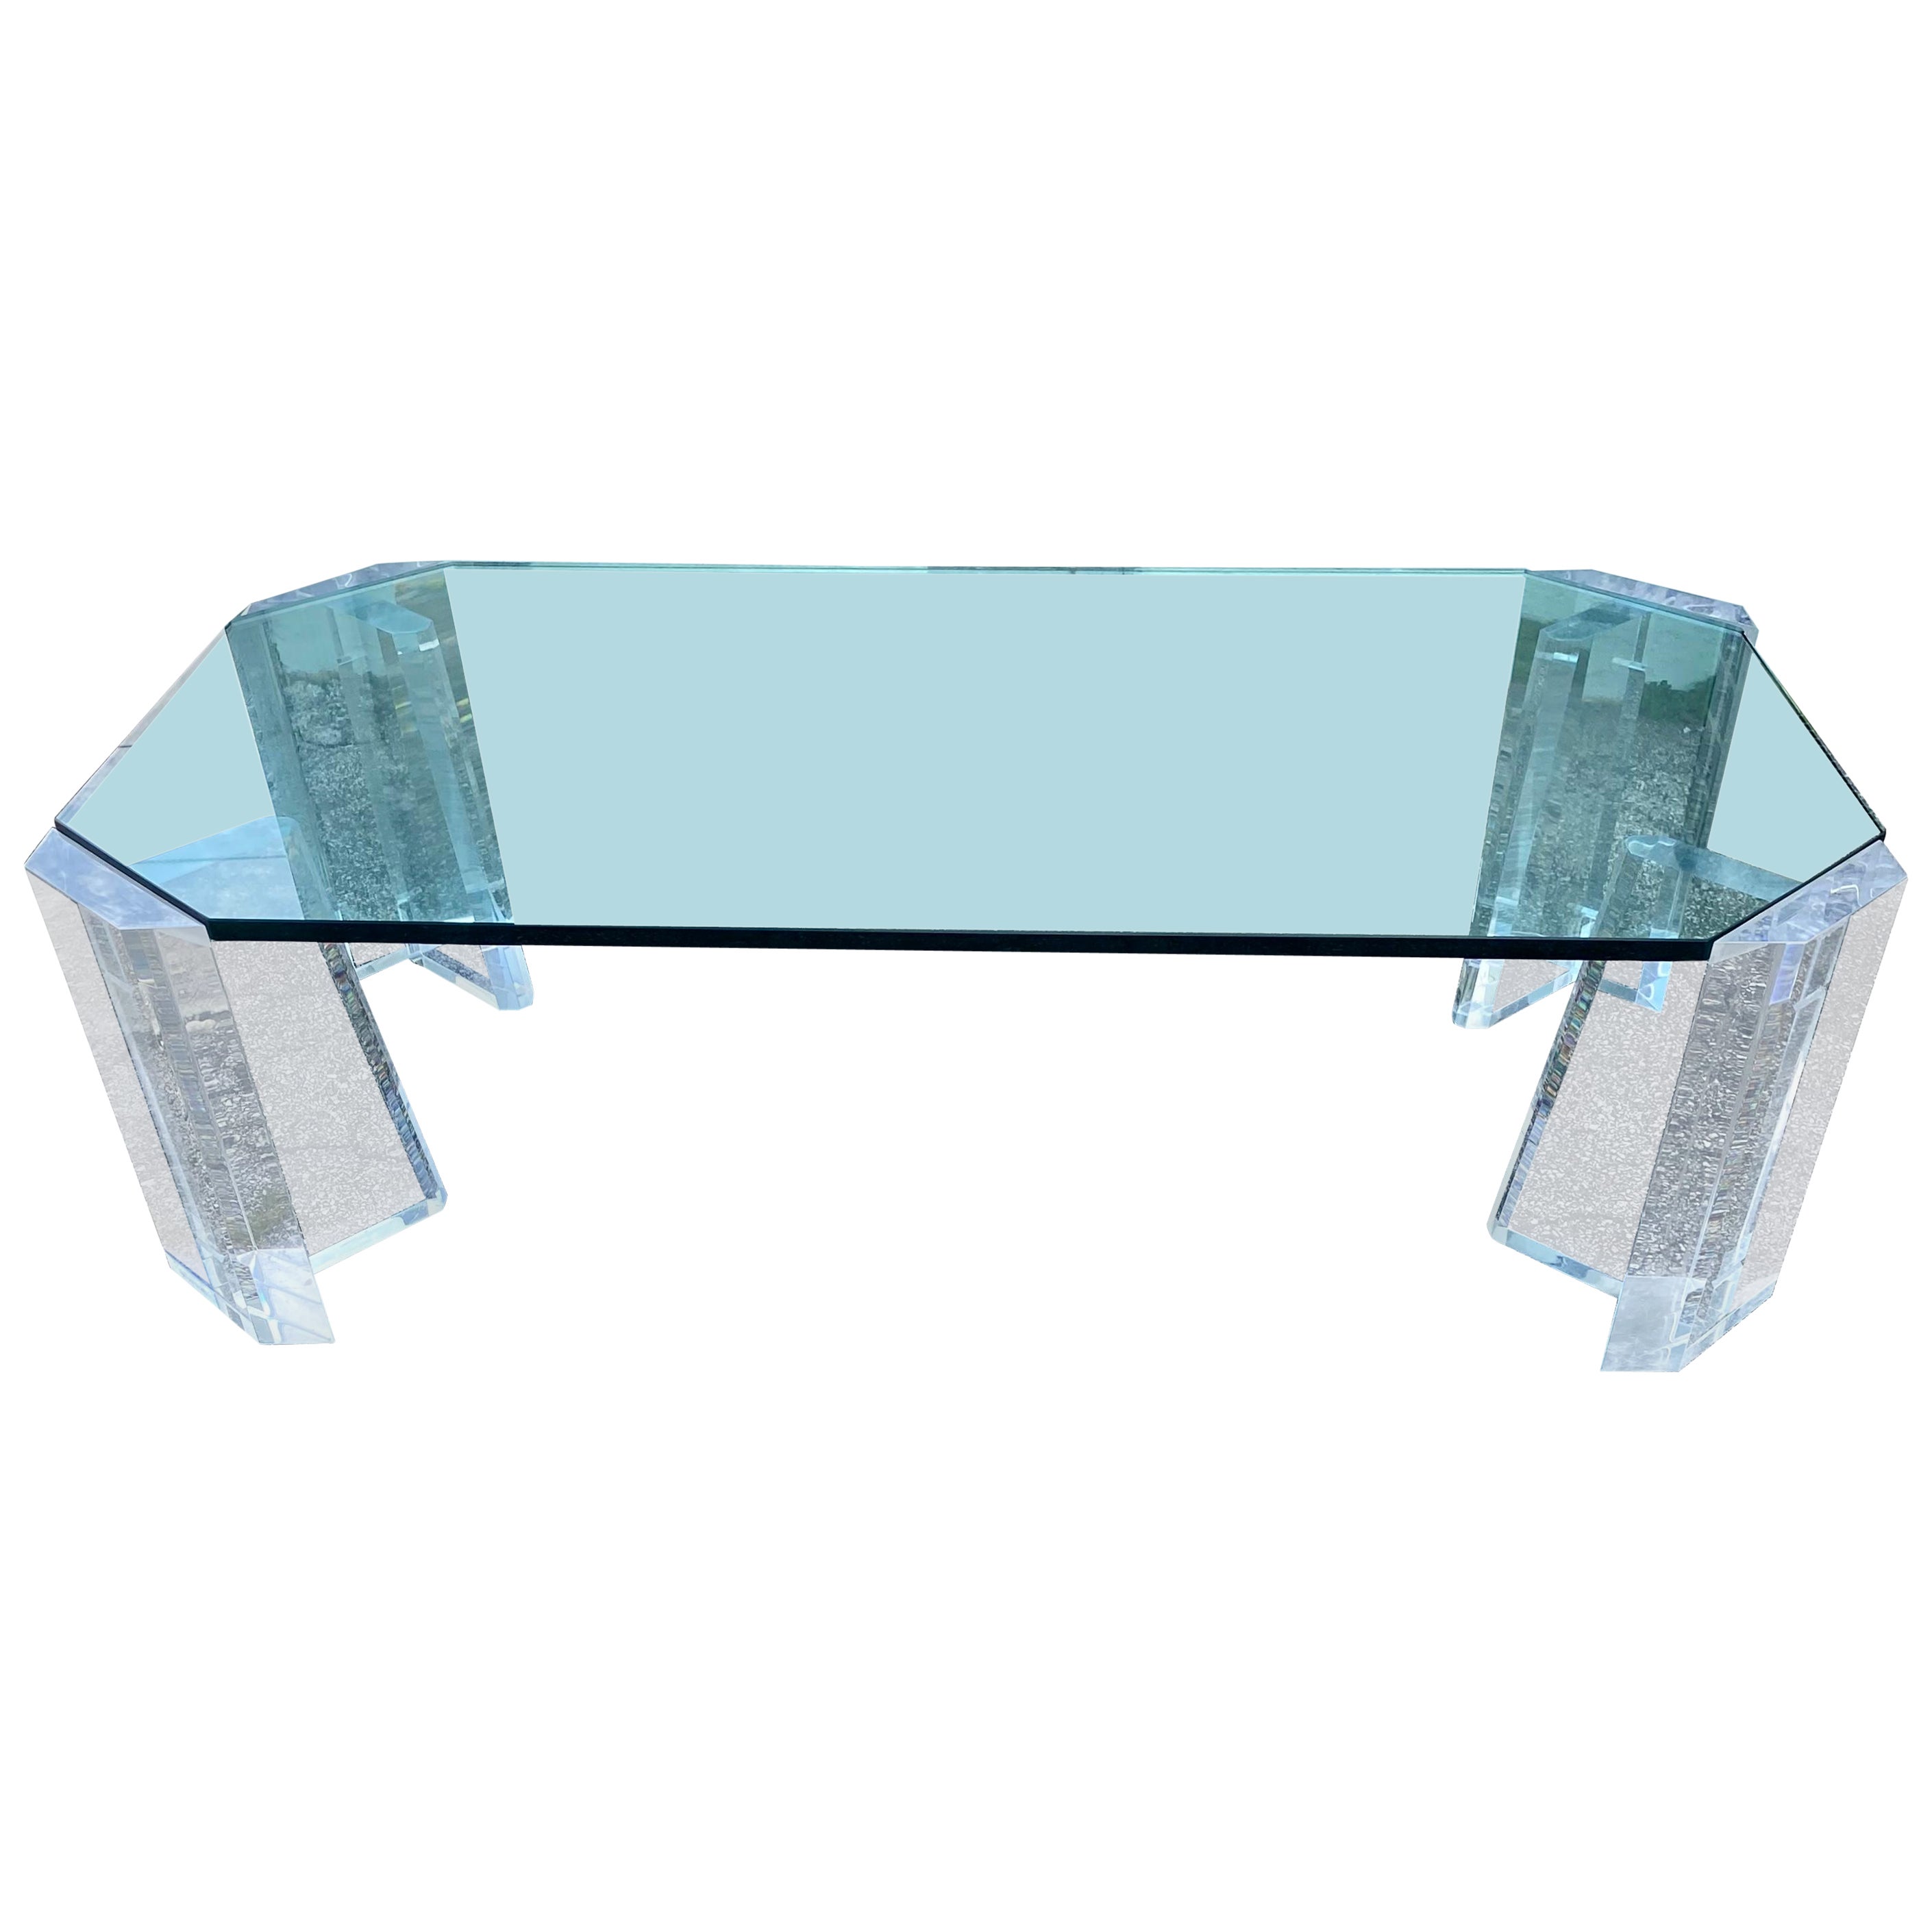 1970s Charles Hollis Lucite Glass Coffee Table For Sale